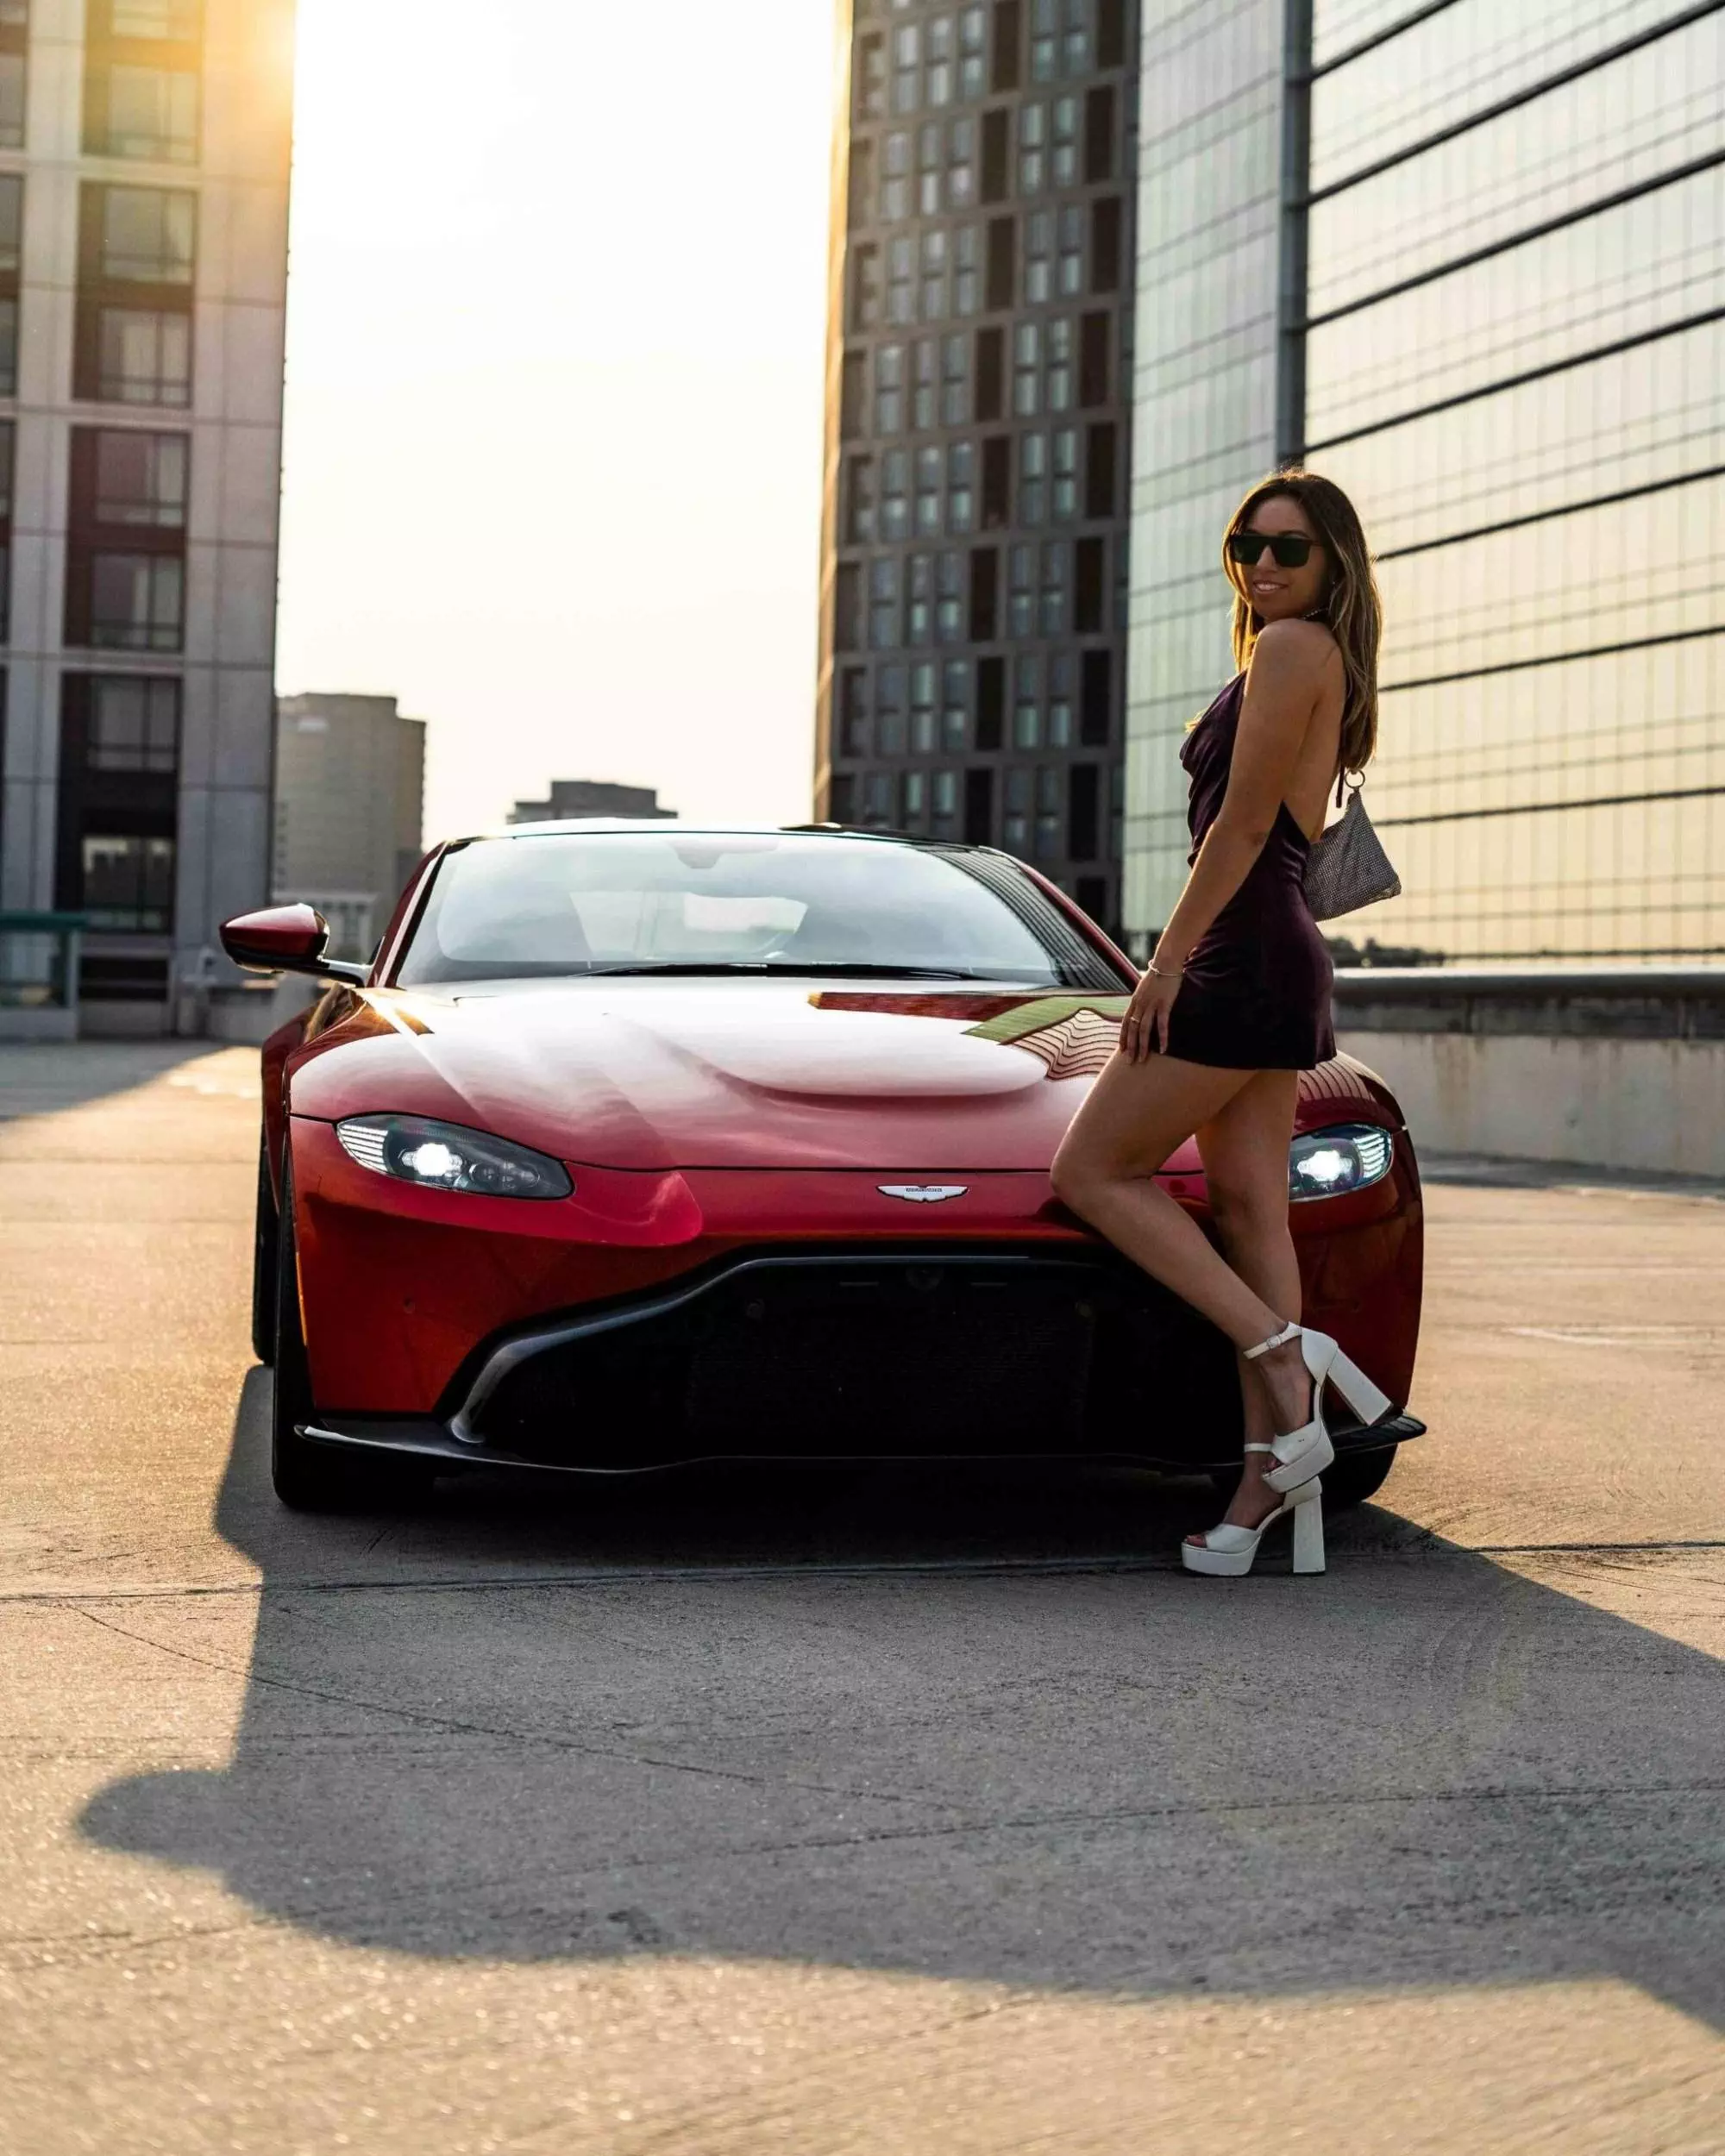 ASTON MARTIN VANTAGE along with our Models | Capital Exotic luxury Car Rental in DC, MD, VA